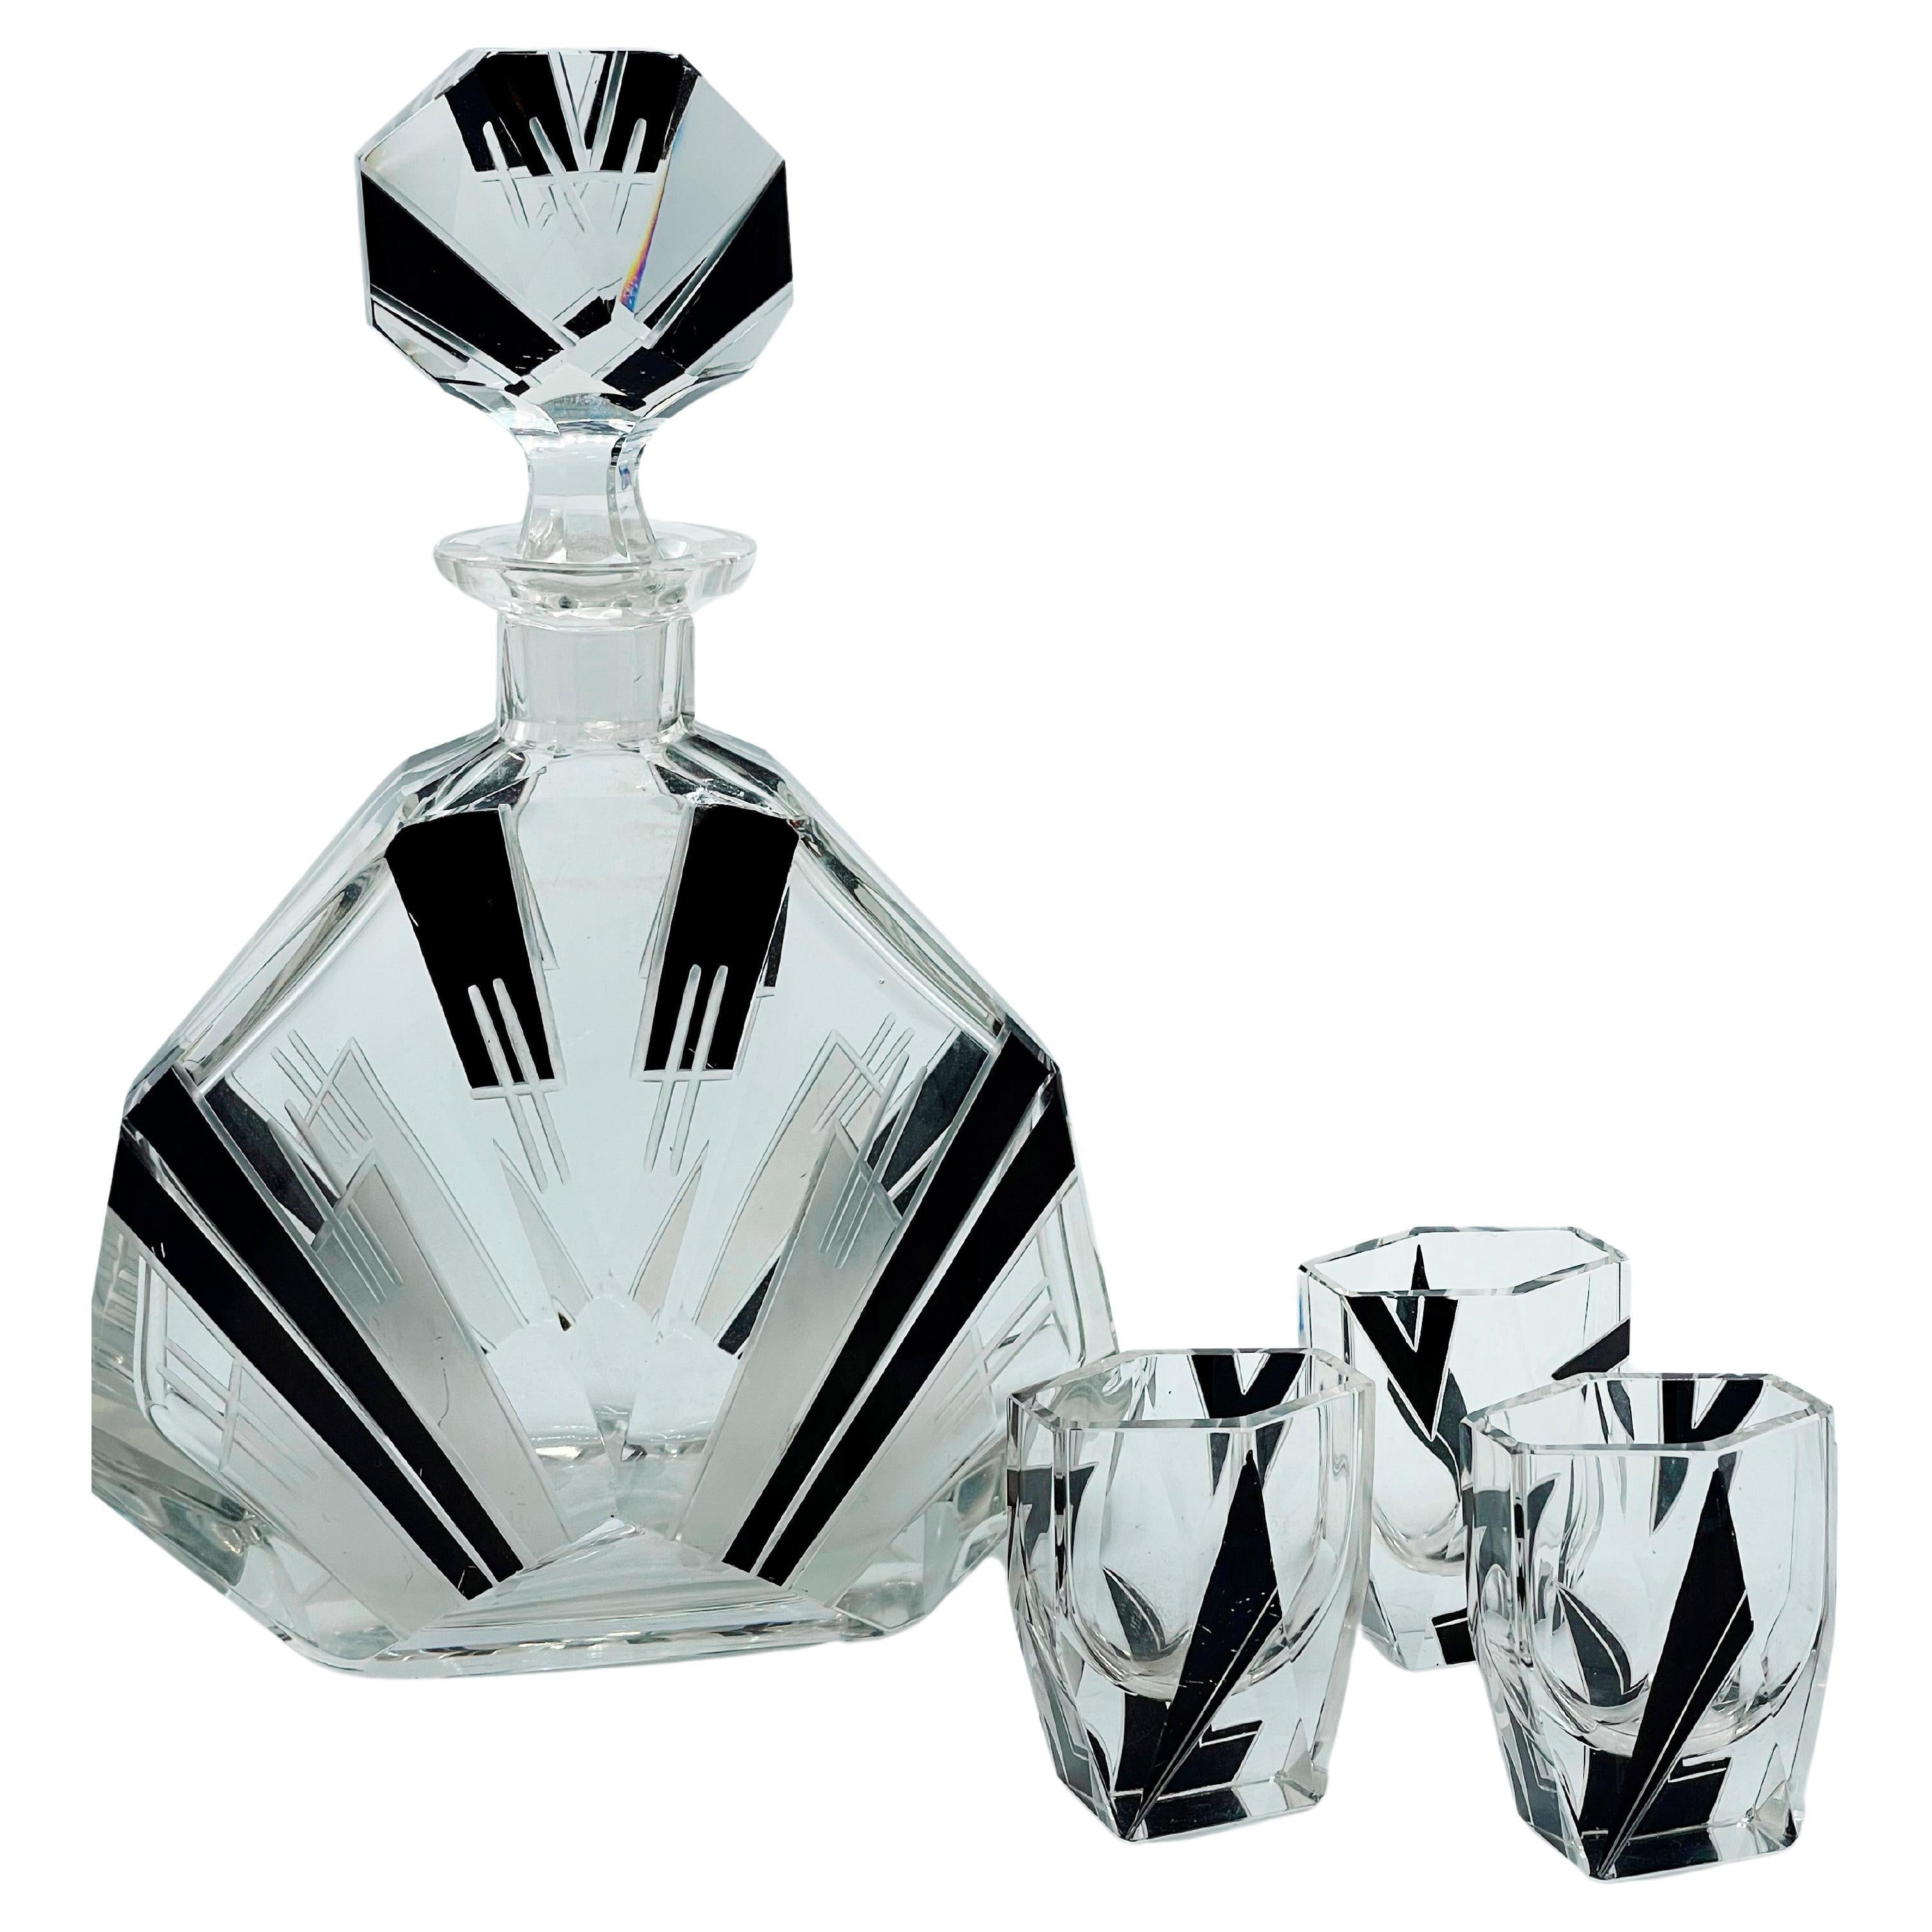 Art Deco 1930s Czech Geometric Glass Decanter Set
Very stylish and appealing Art Deco decanter set which comes with 3 matching glasses, and decanter, the whole being heavily enameled with geometric decoration. The colour is black the condition is